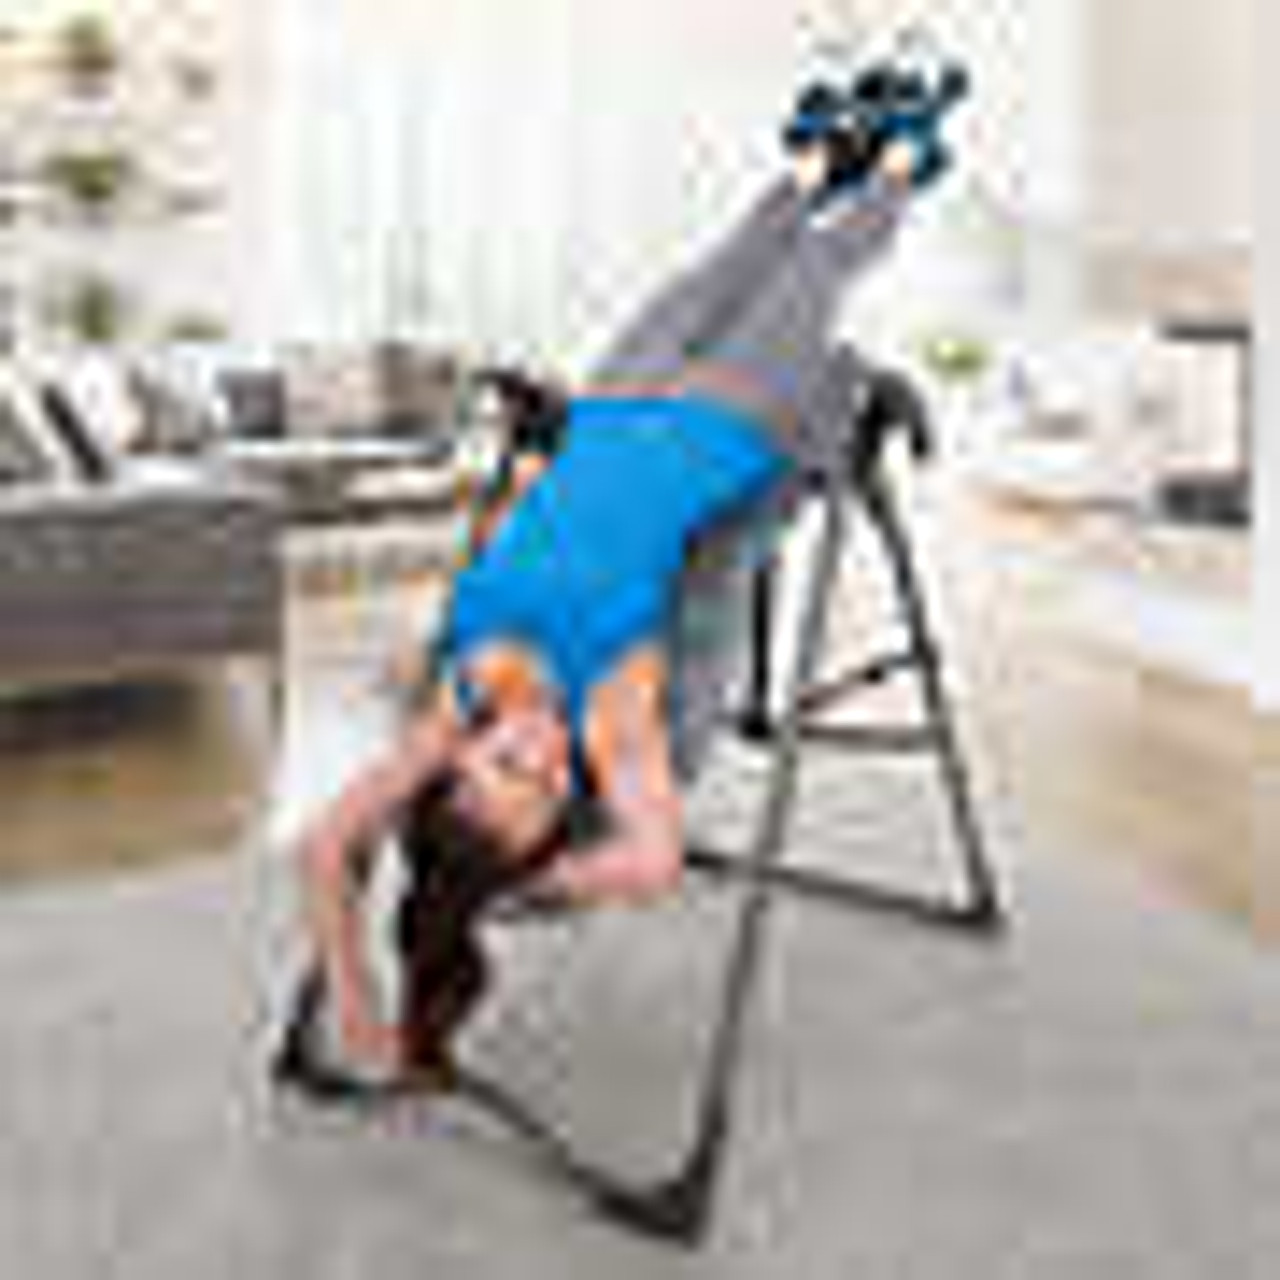 Teeter Fitspine X1F Inversion Table - Premium Inversion Therapy with FitSpine FlexTech Bed - Chicken Pieces